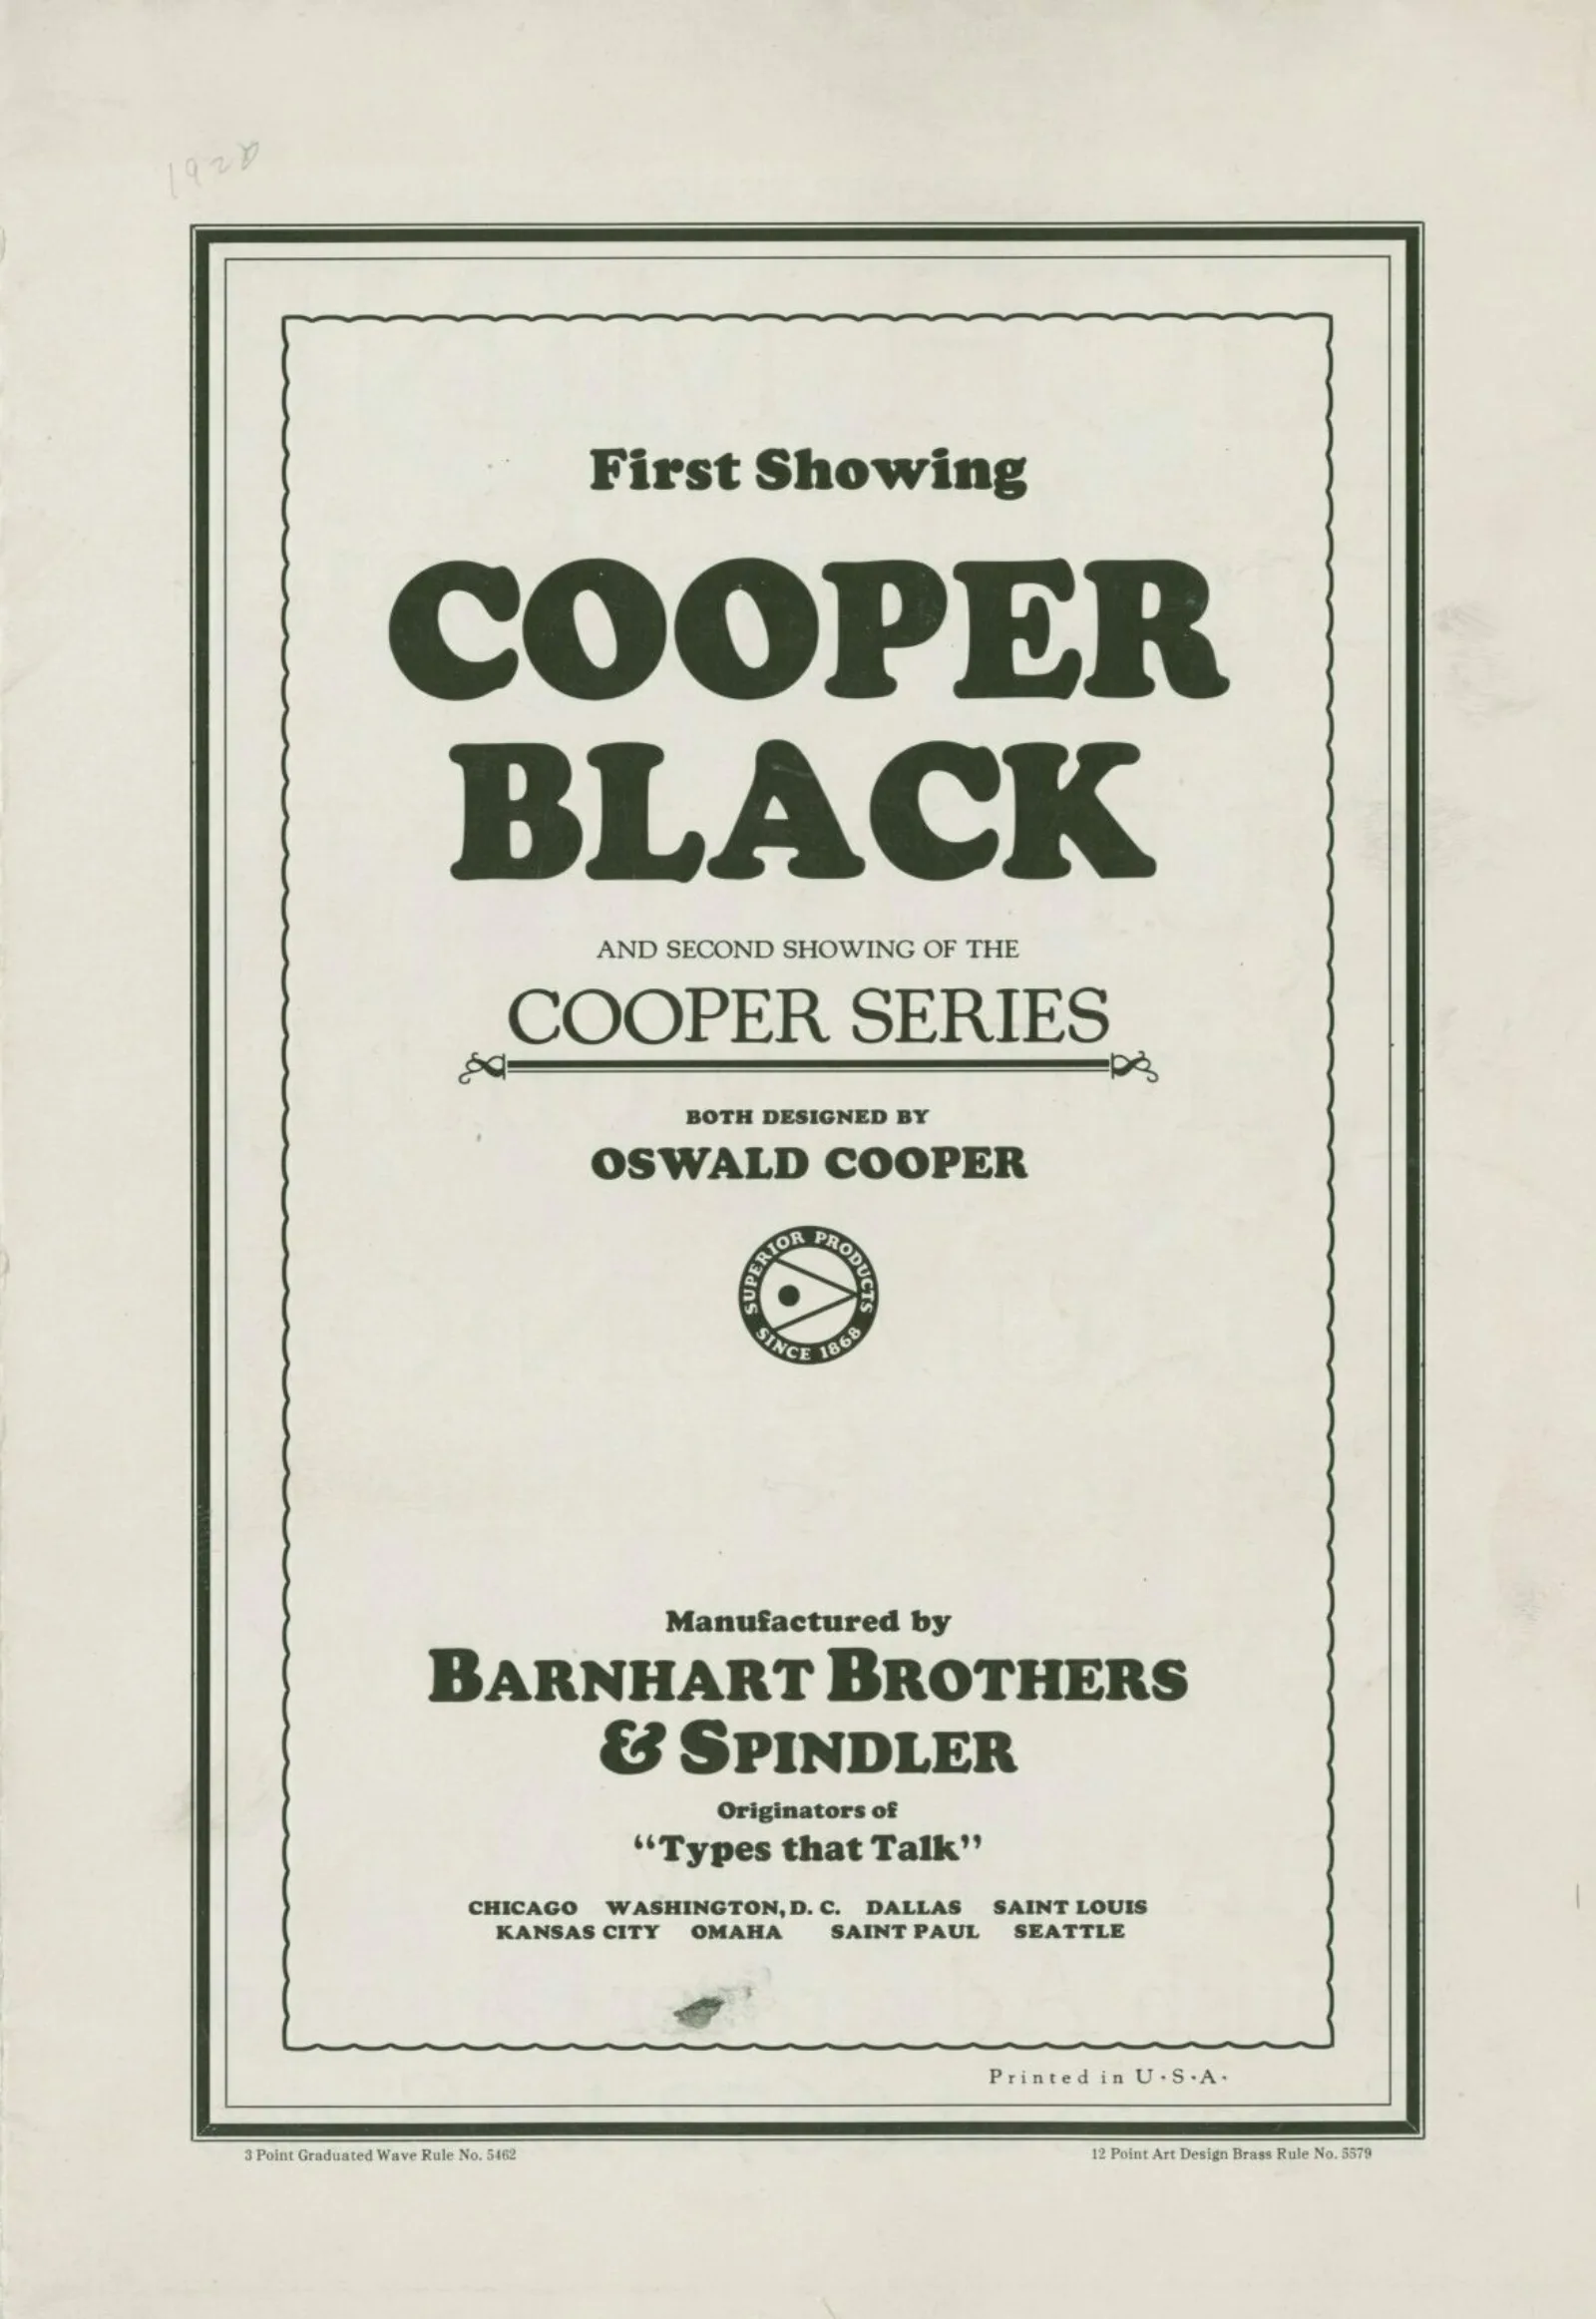 Advertising brochure for Cooper Black. The title on the cover says "First showing, Cooper Black."